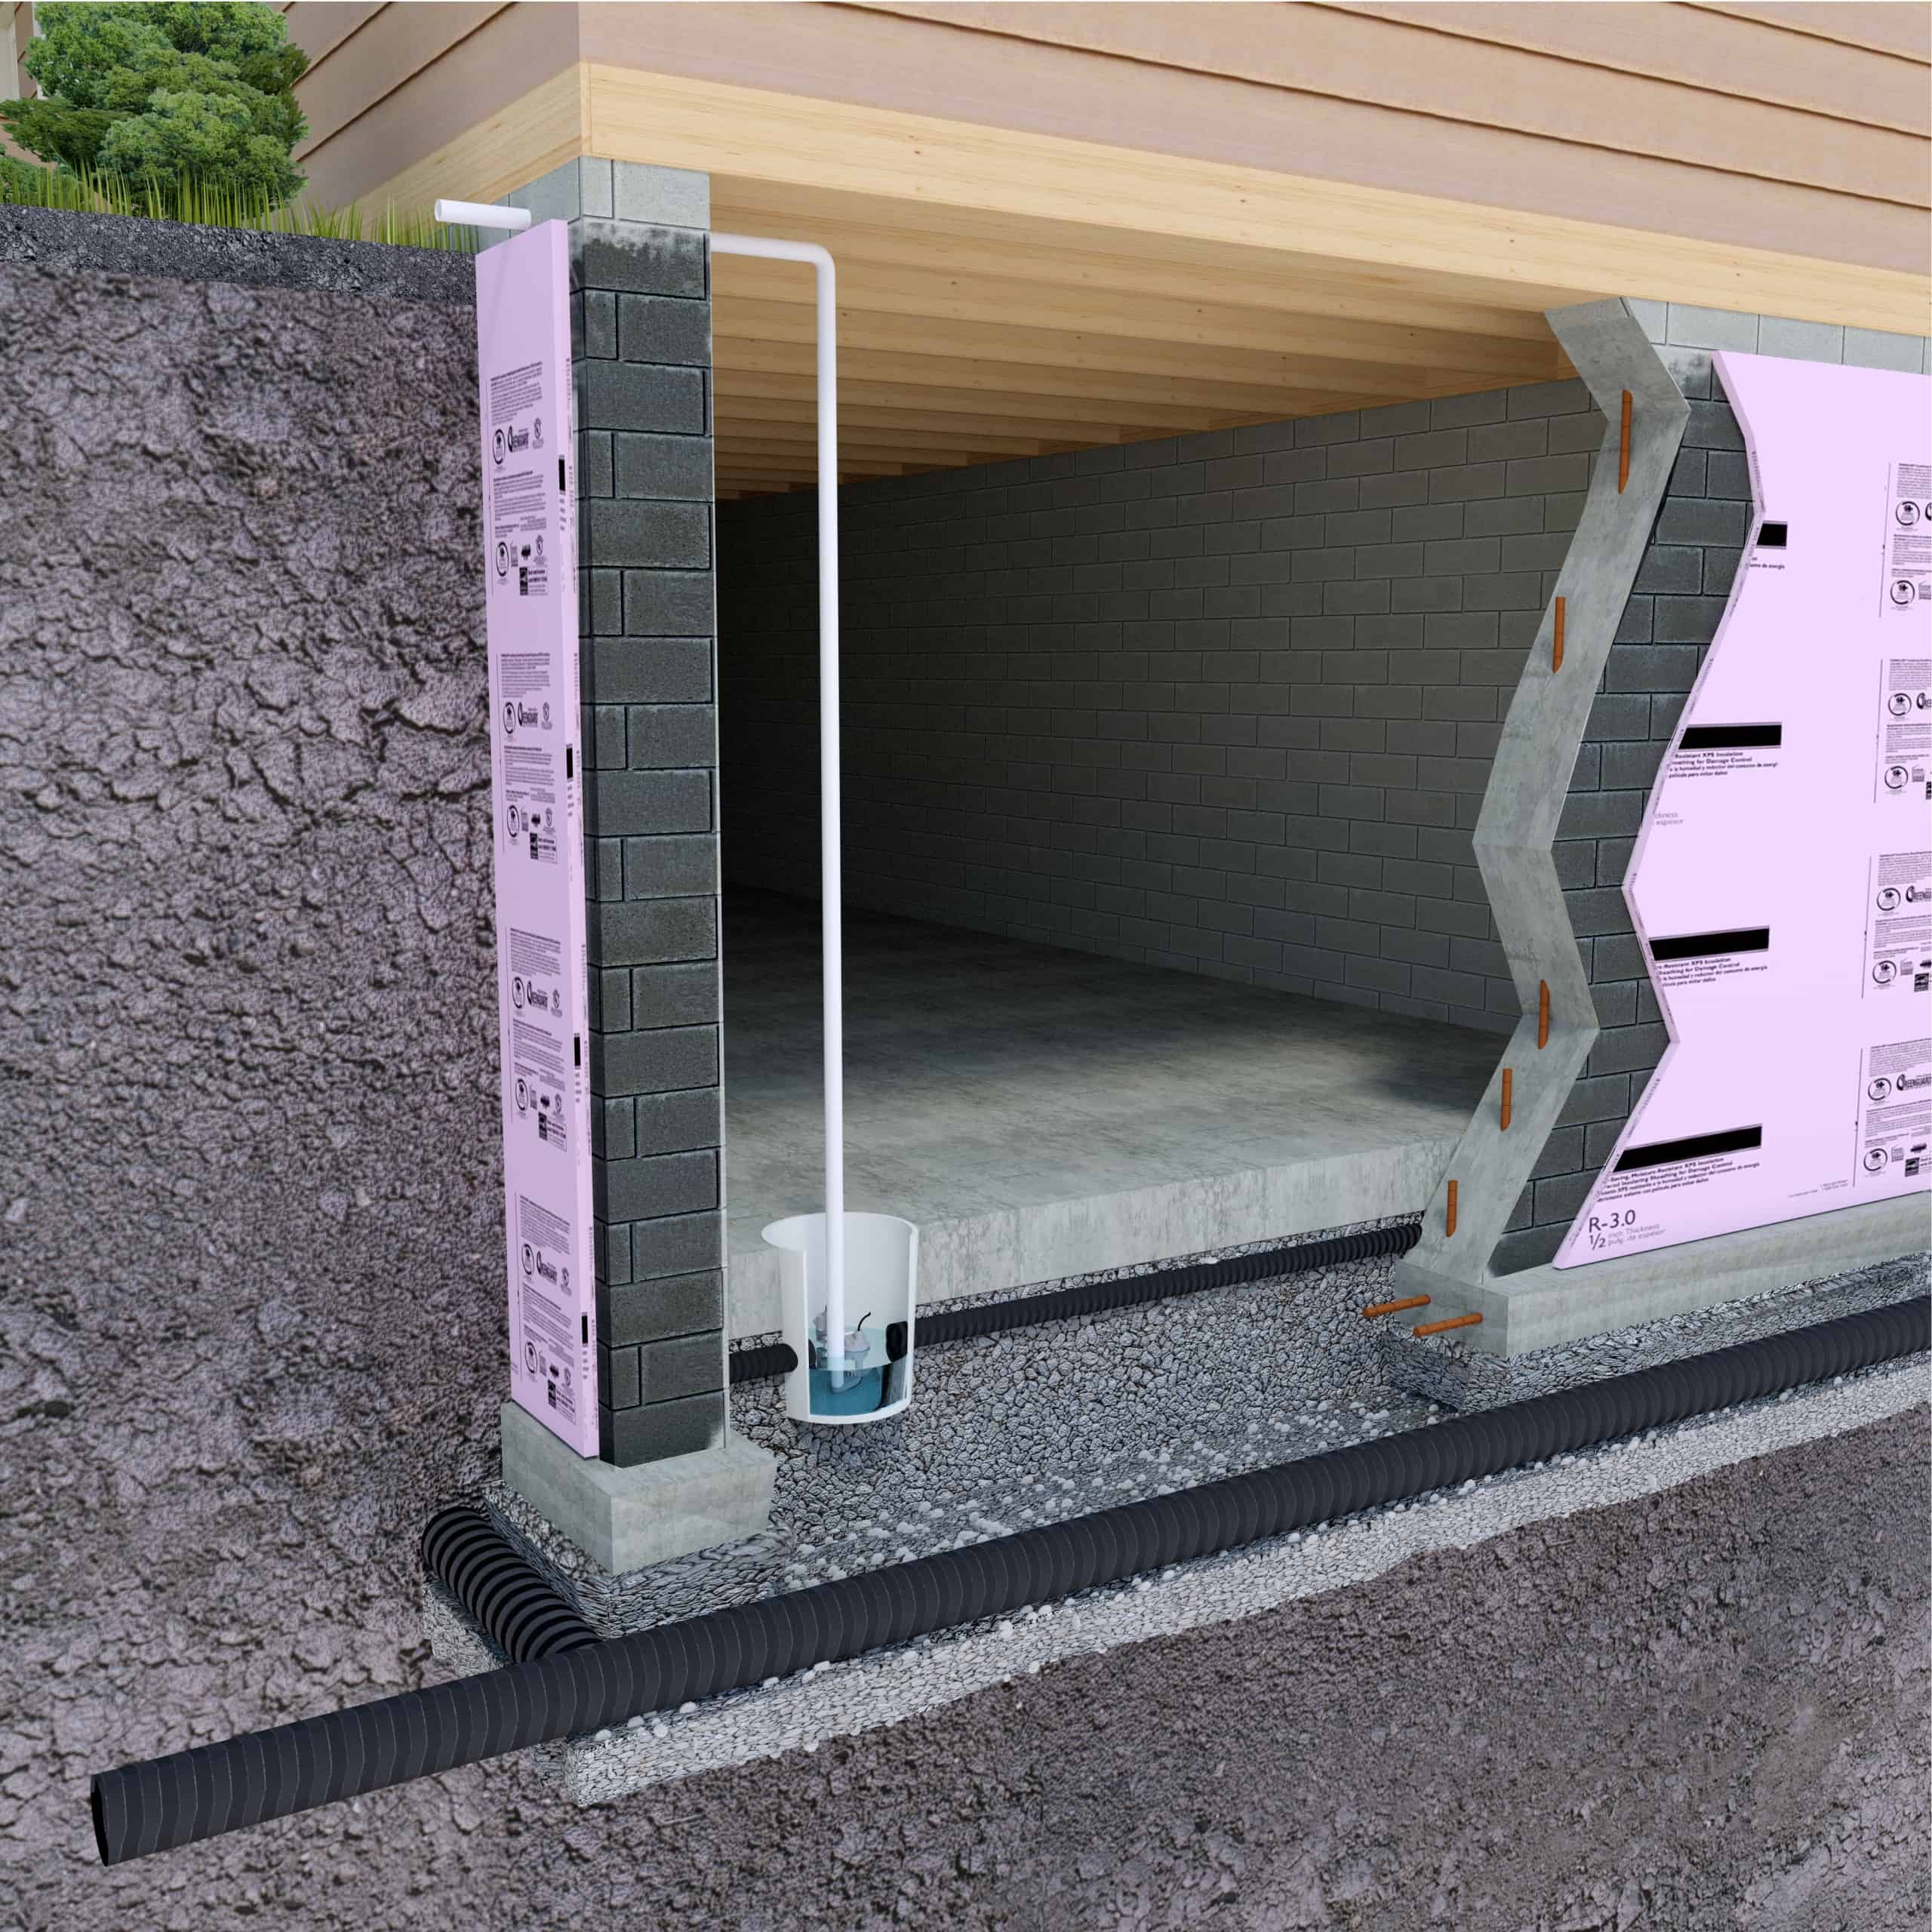 House Foundation Illustration with sump pump